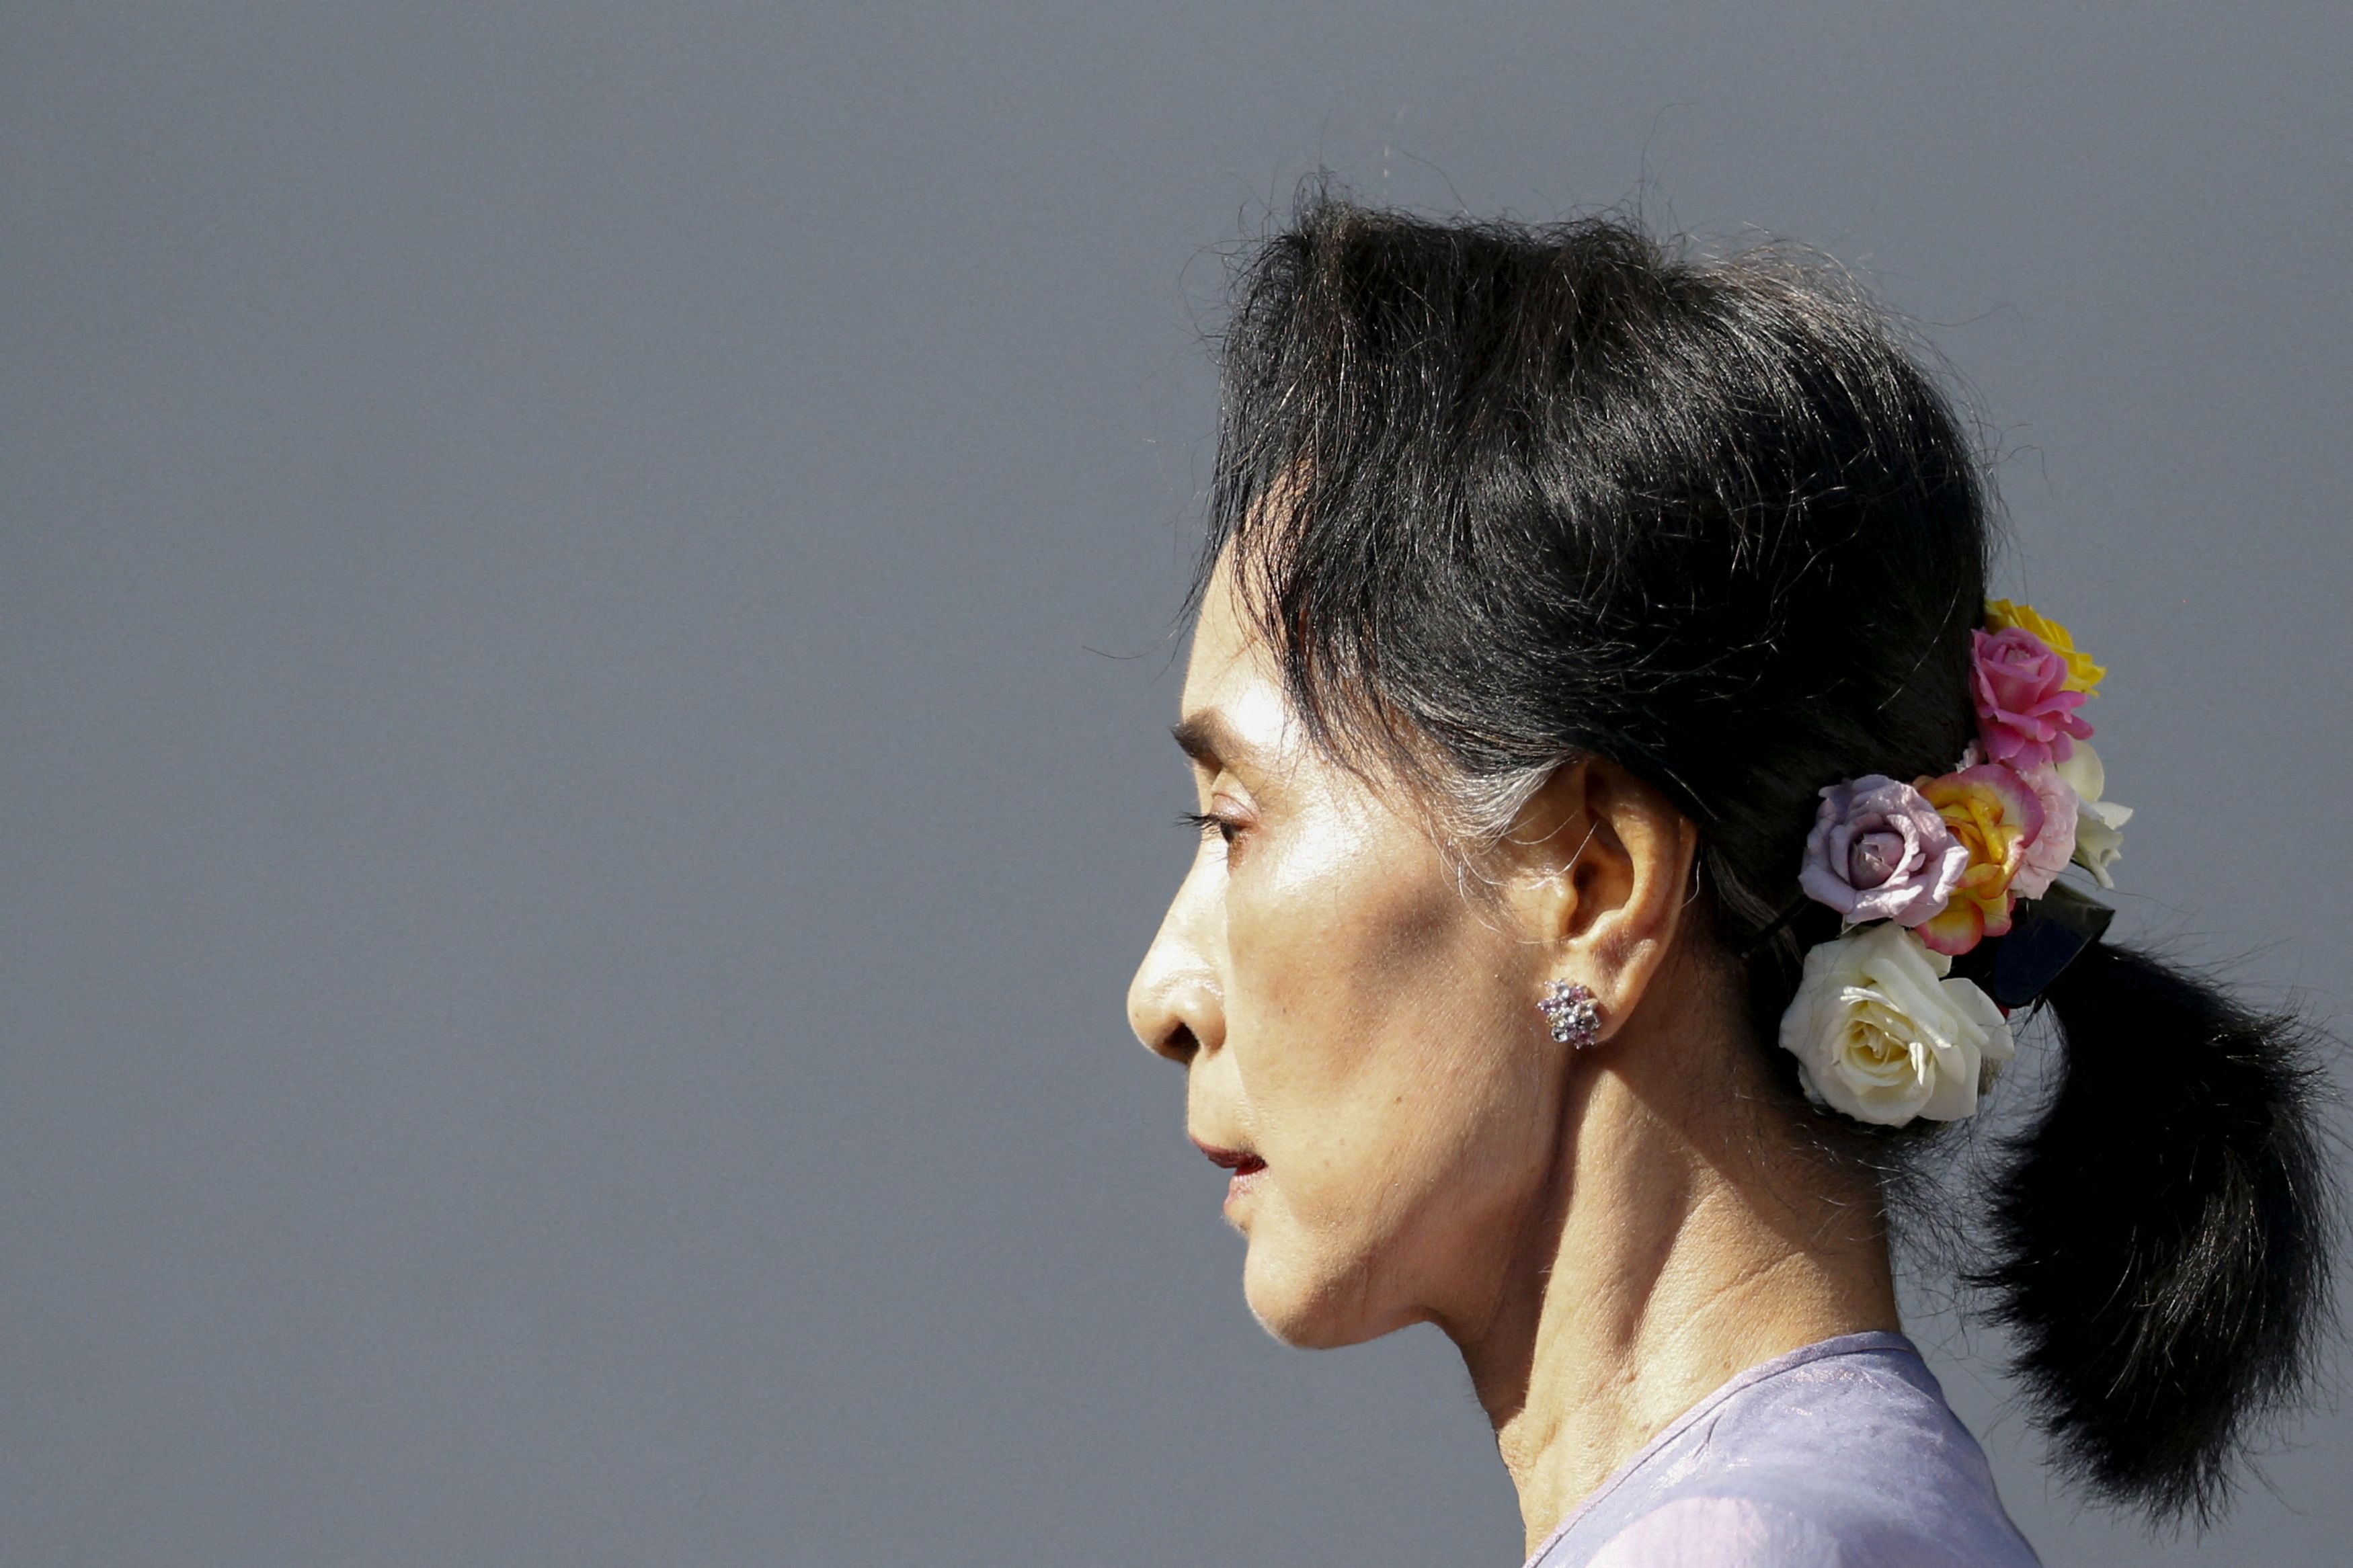 Myanmar's National League for Democracy Party leader Aung San Suu Kyi arrives at a news conference at her home in Yangon November 5, 2015. REUTERS/Jorge Silva/File Photo